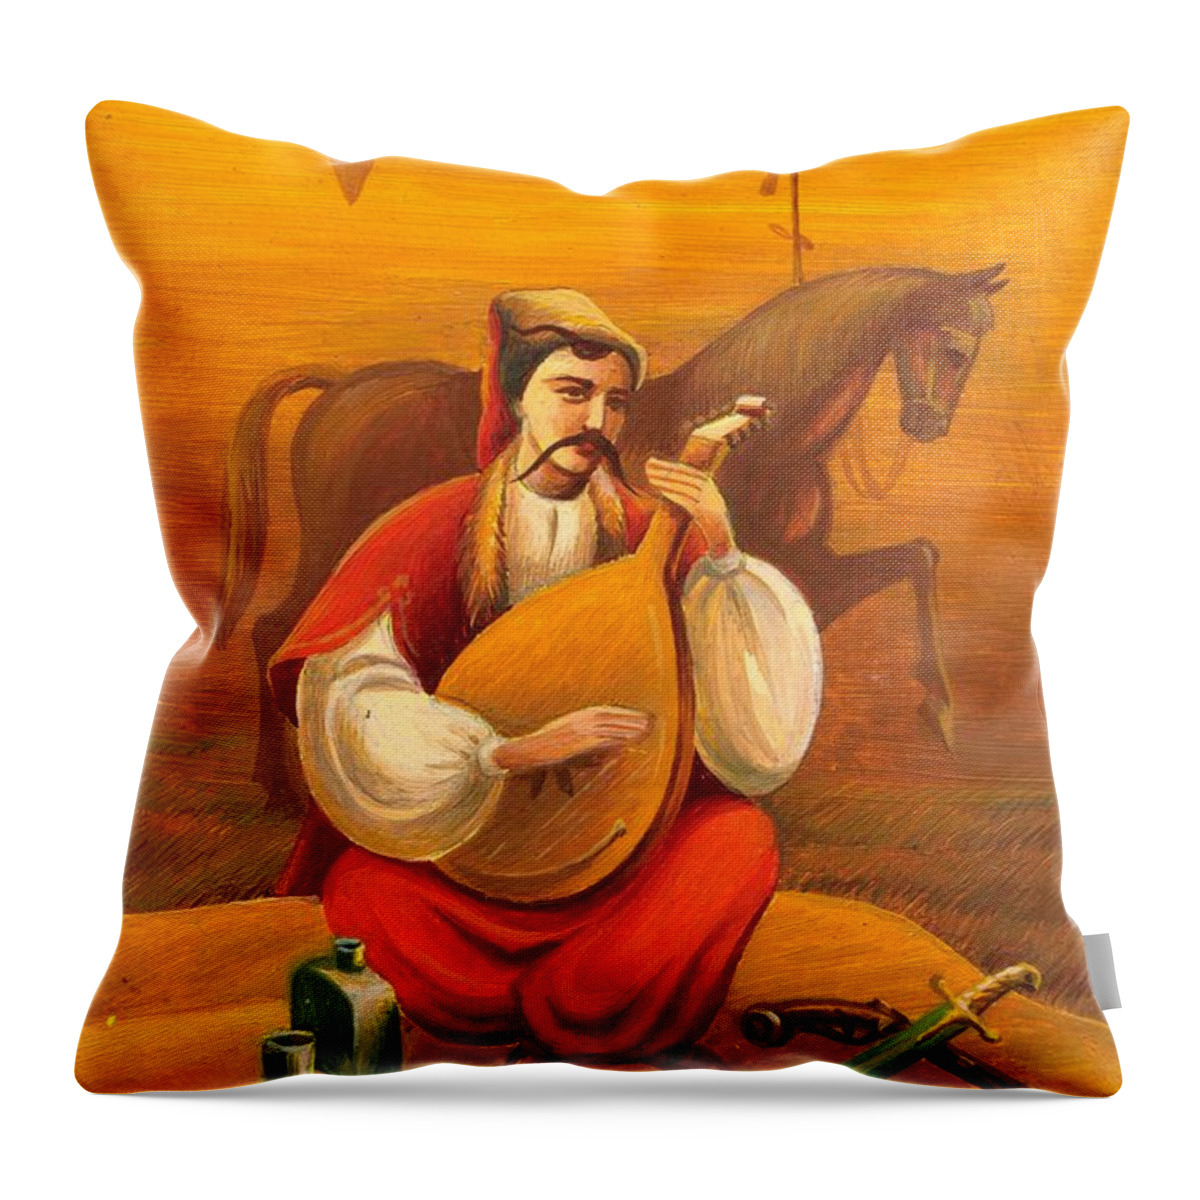 Cossack Mamay Throw Pillow featuring the painting Cossack Mamay #2 by Oleg Zavarzin